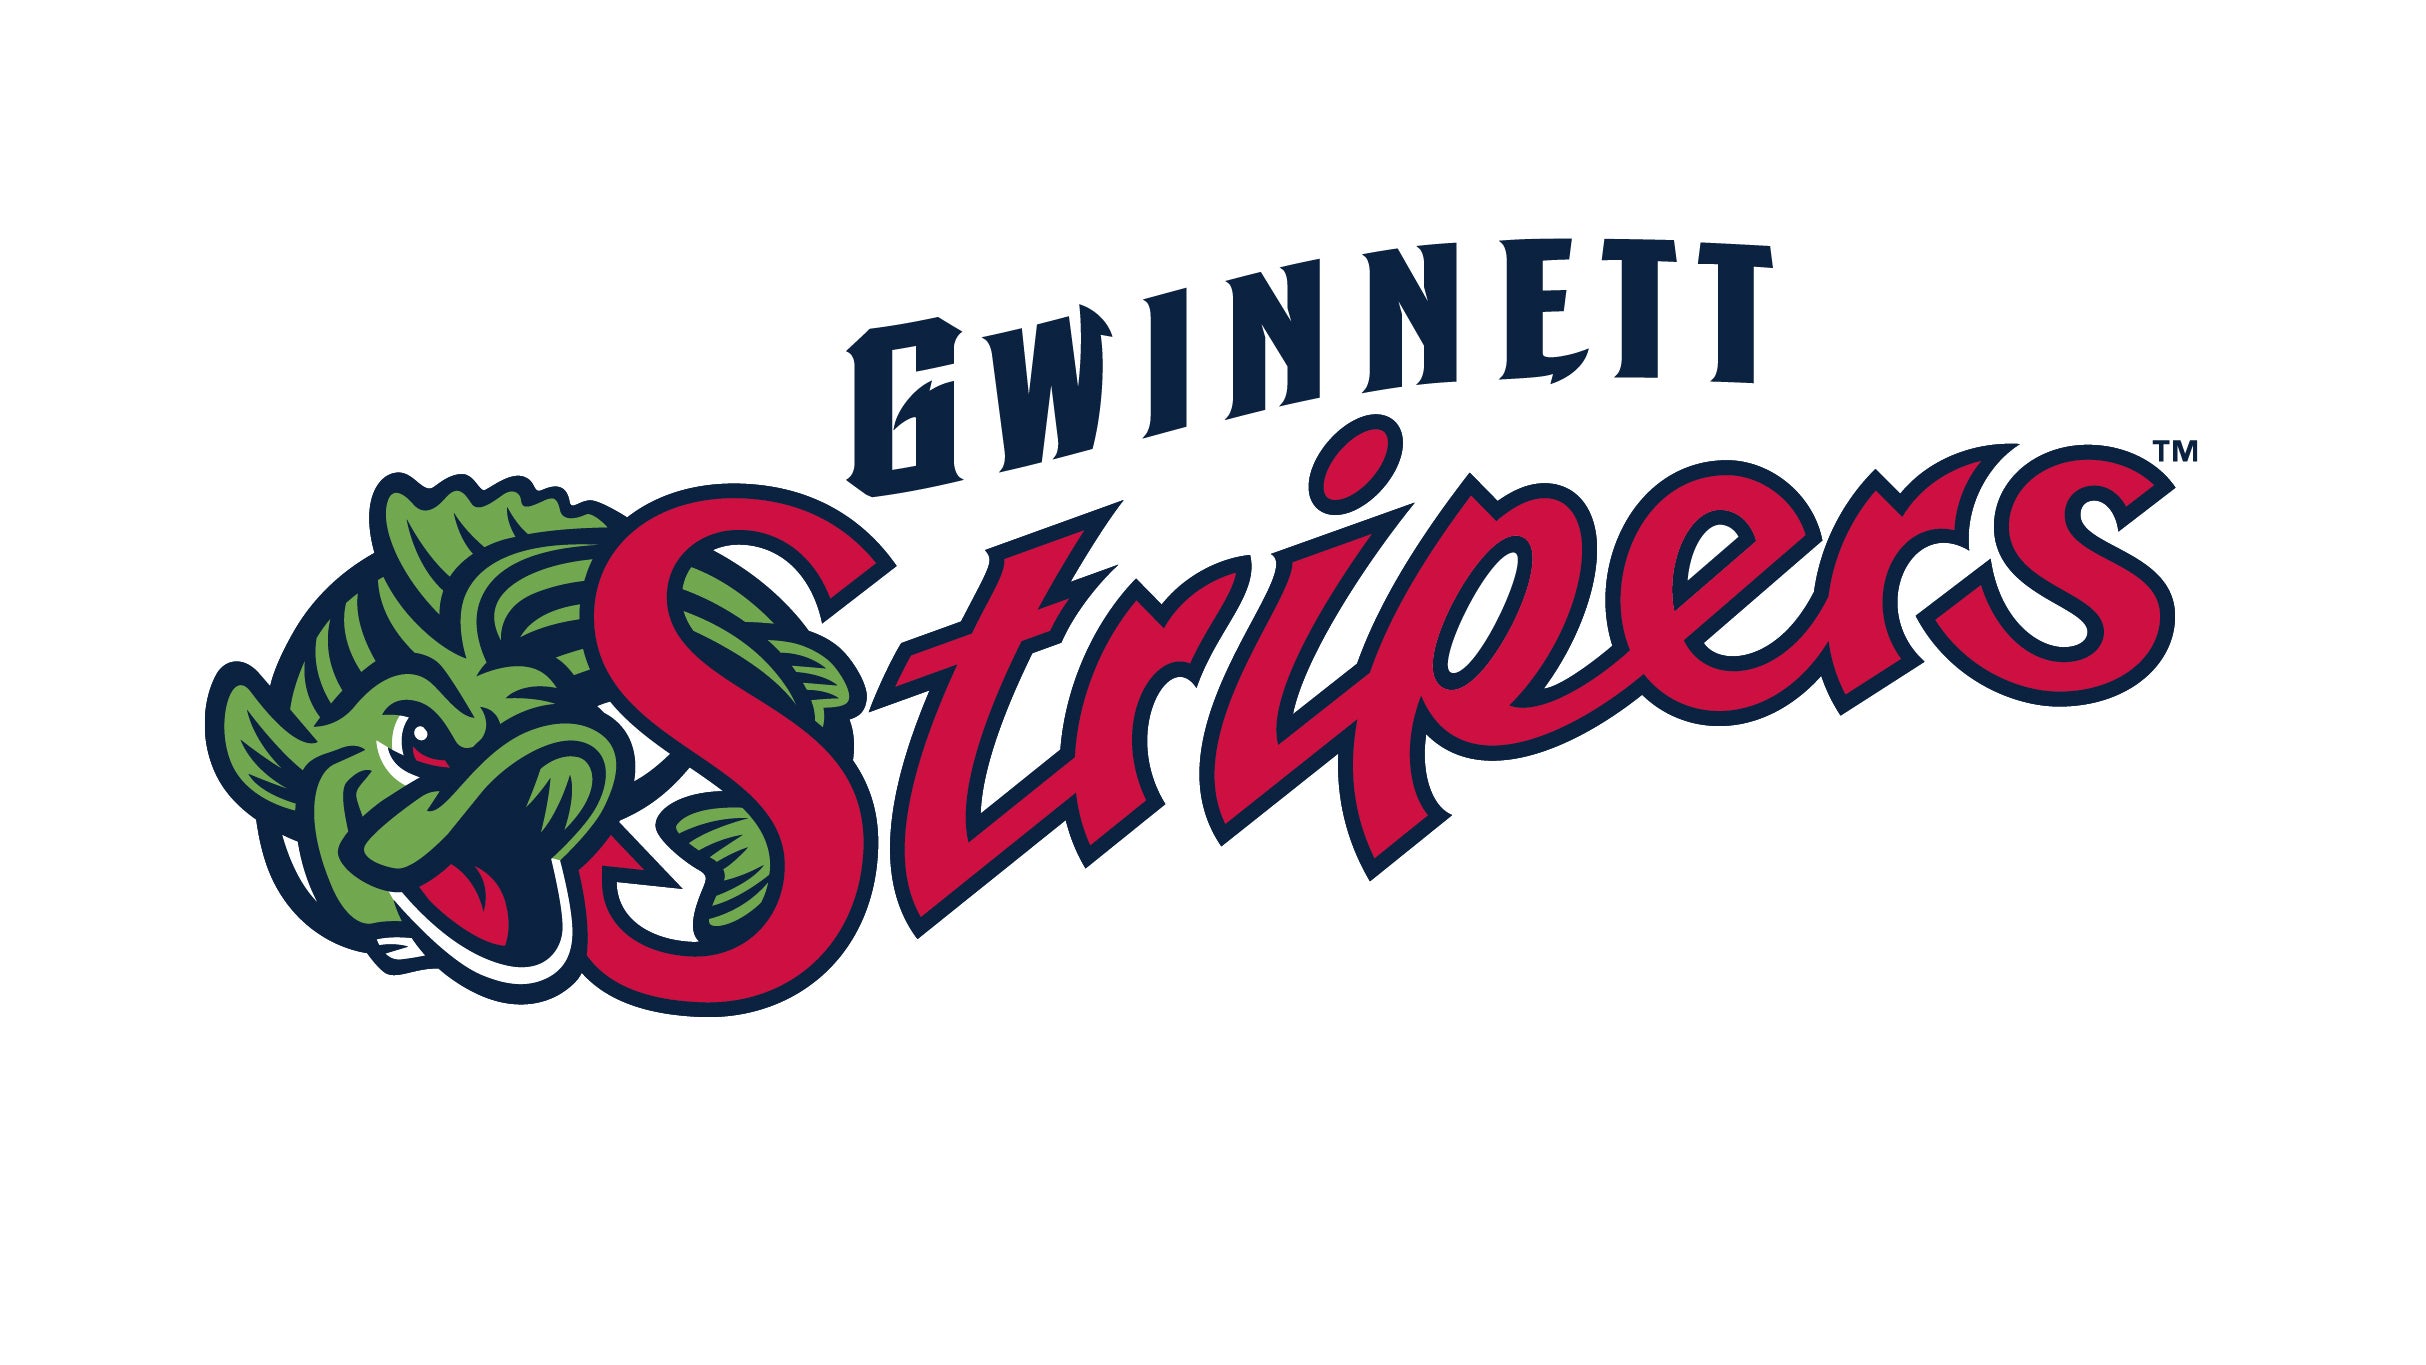 Gwinnett Stripers vs. Buffalo Bisons at Coolray Field